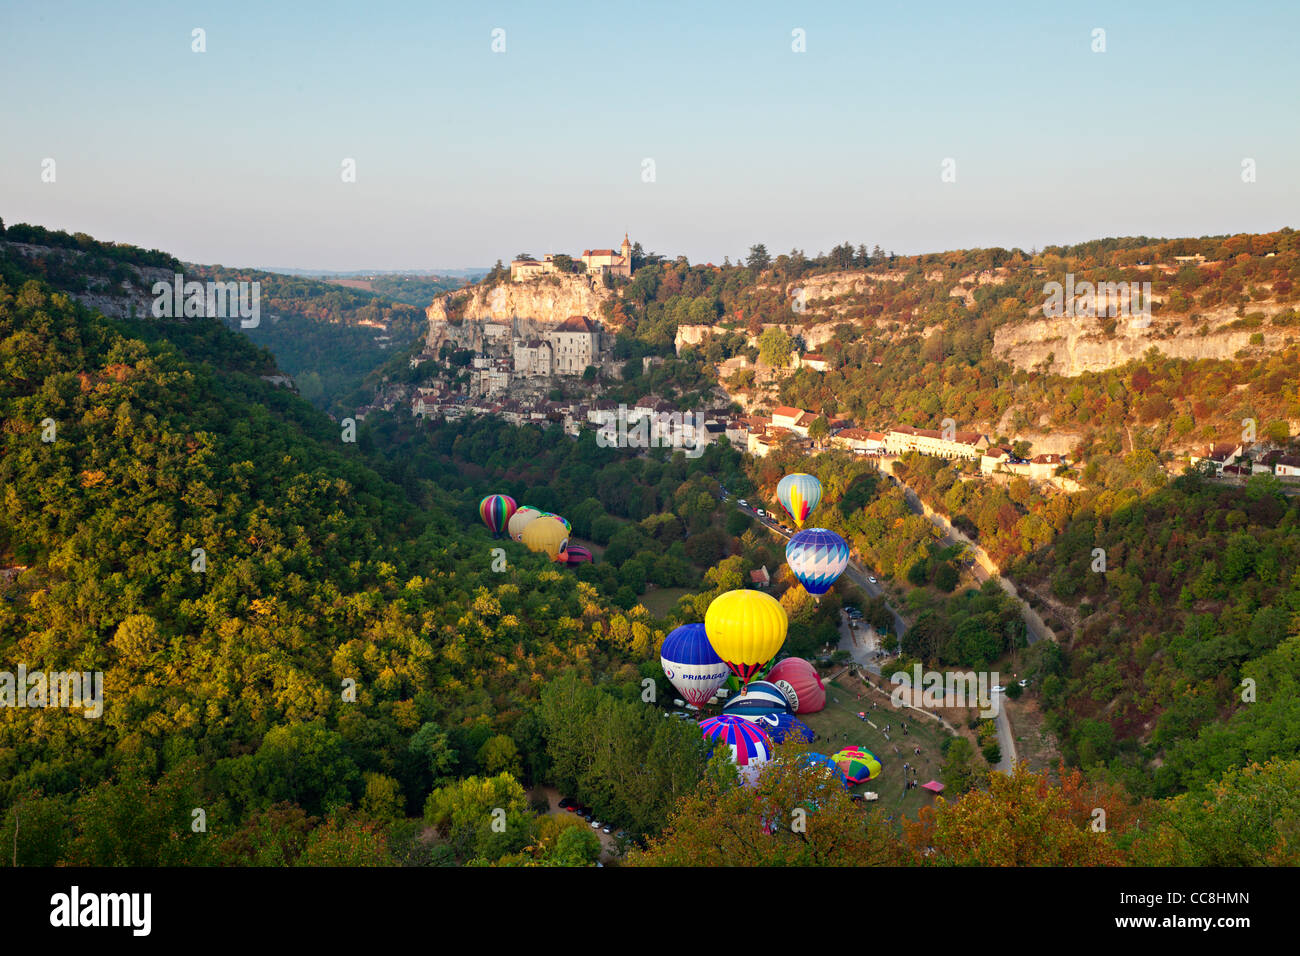 Hot air balloons (montgolfieres) at Rocamadour in the early morning. Stock Photo